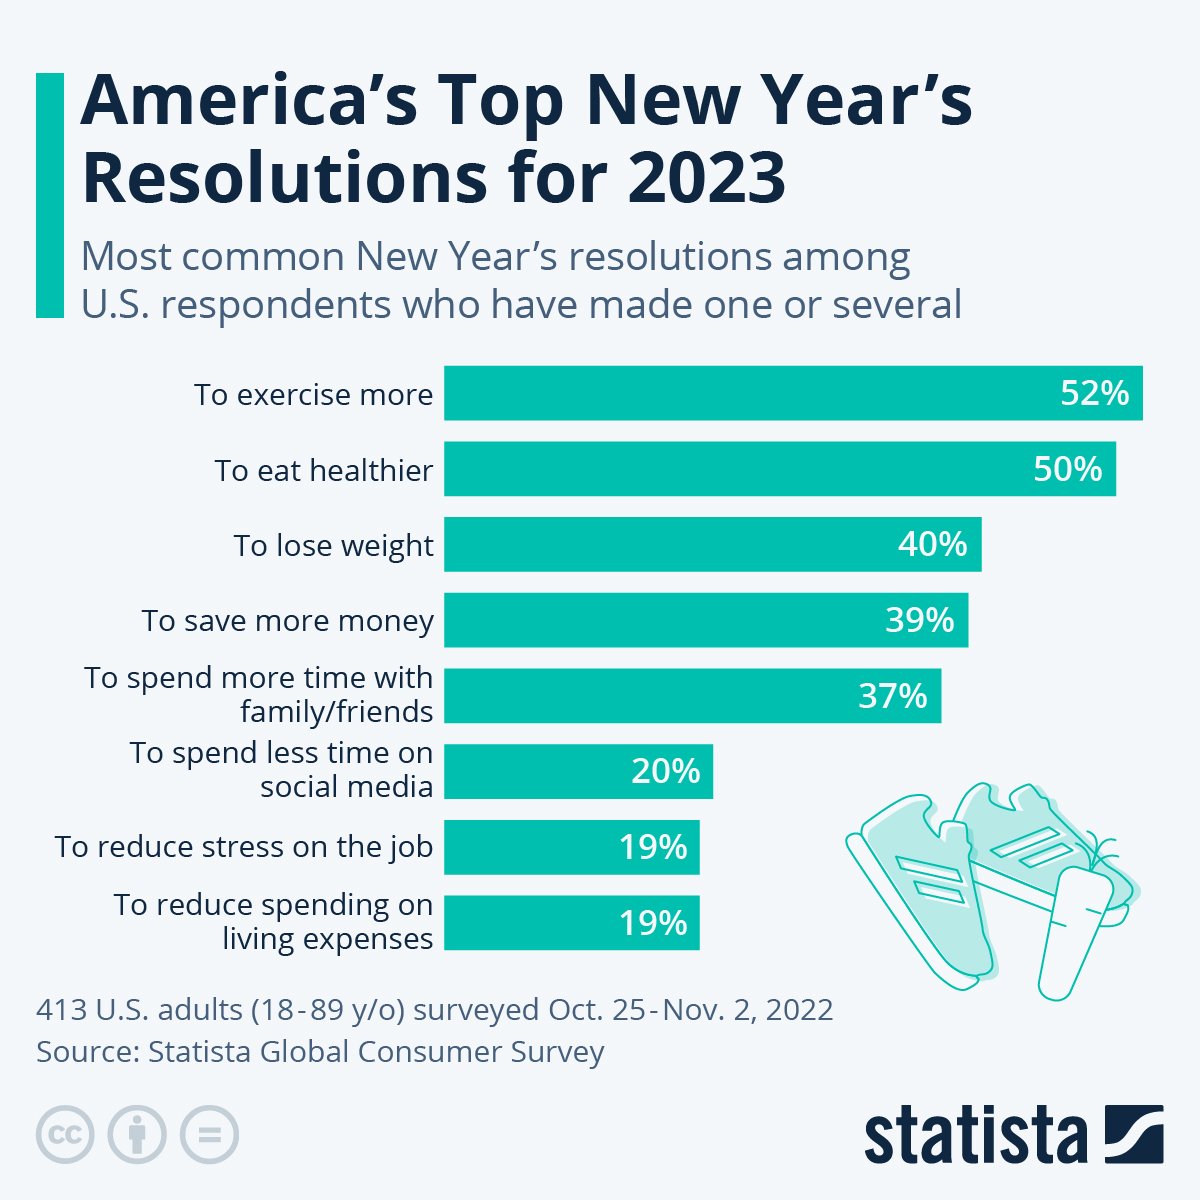 Statista’s Consumer Insights survey results for Top New Year's Resolutions for 2023